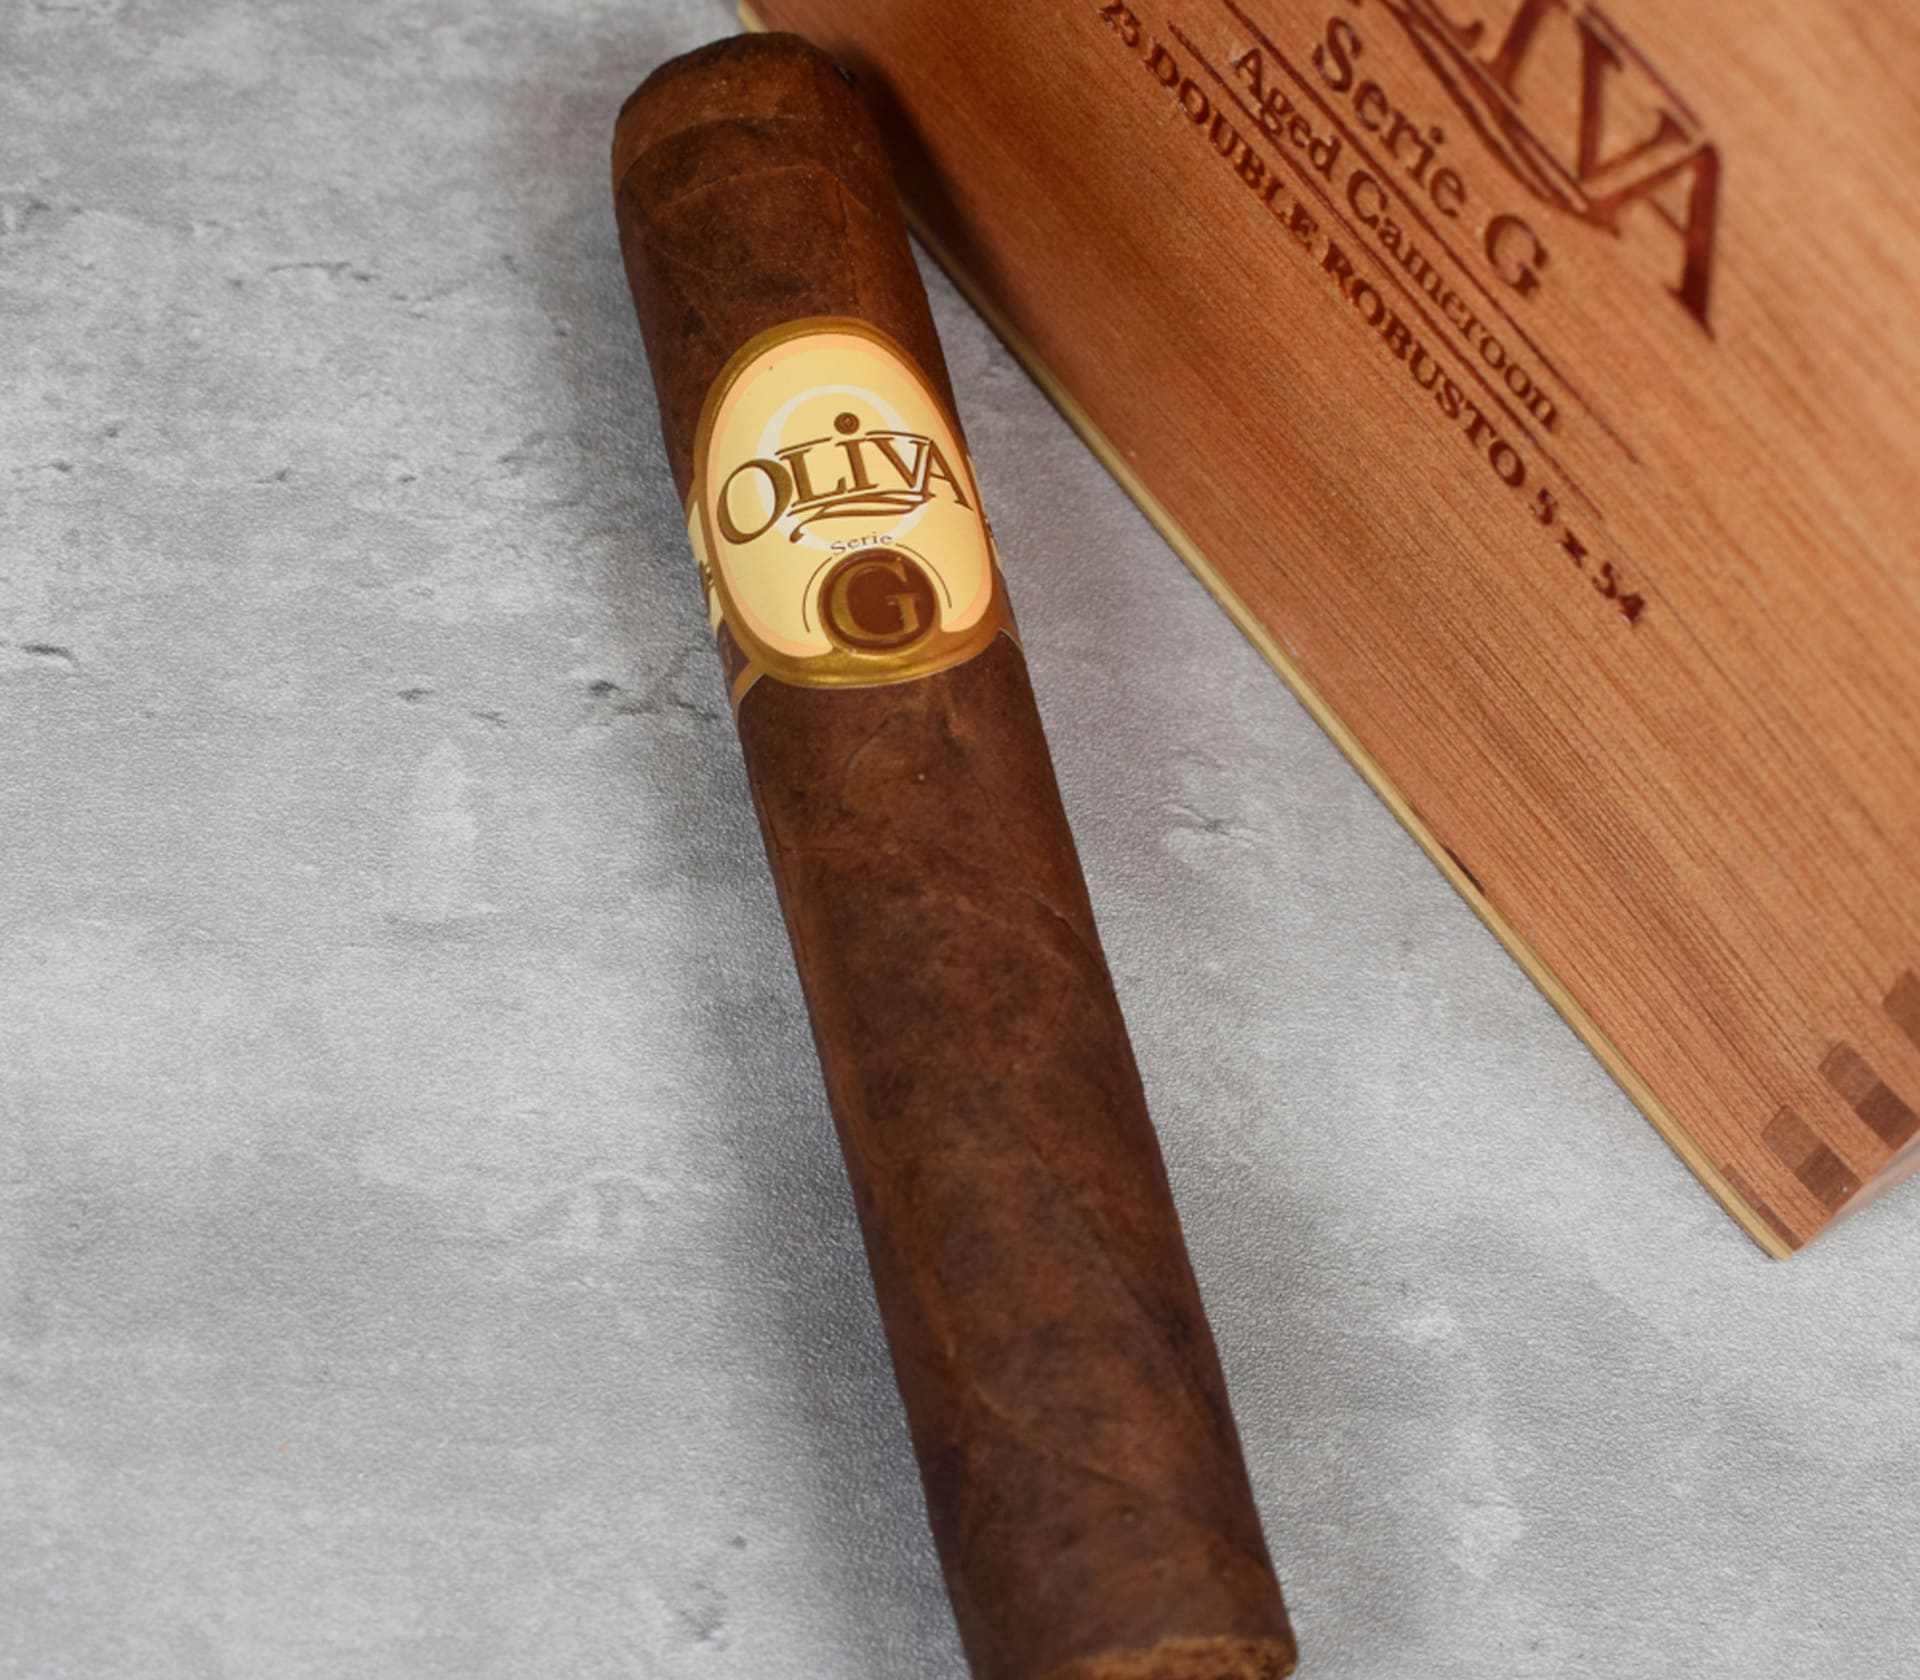 Serie G Double Robusto - Caixa 25 unid